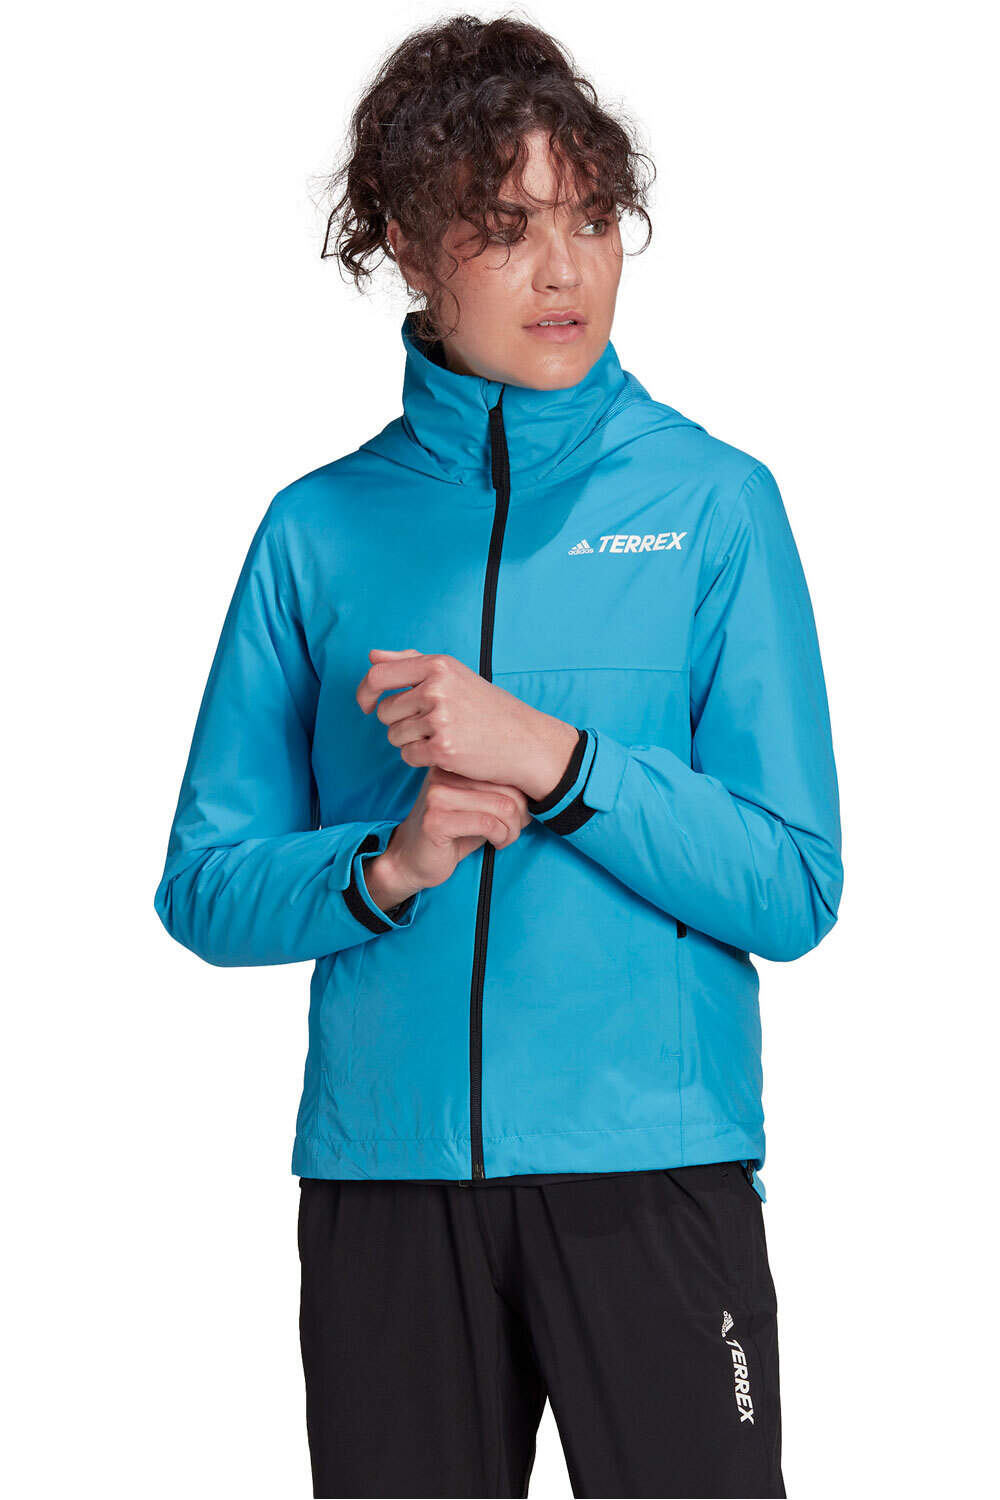 adidas chaqueta impermeable mujer W MT RR Jacket vista frontal